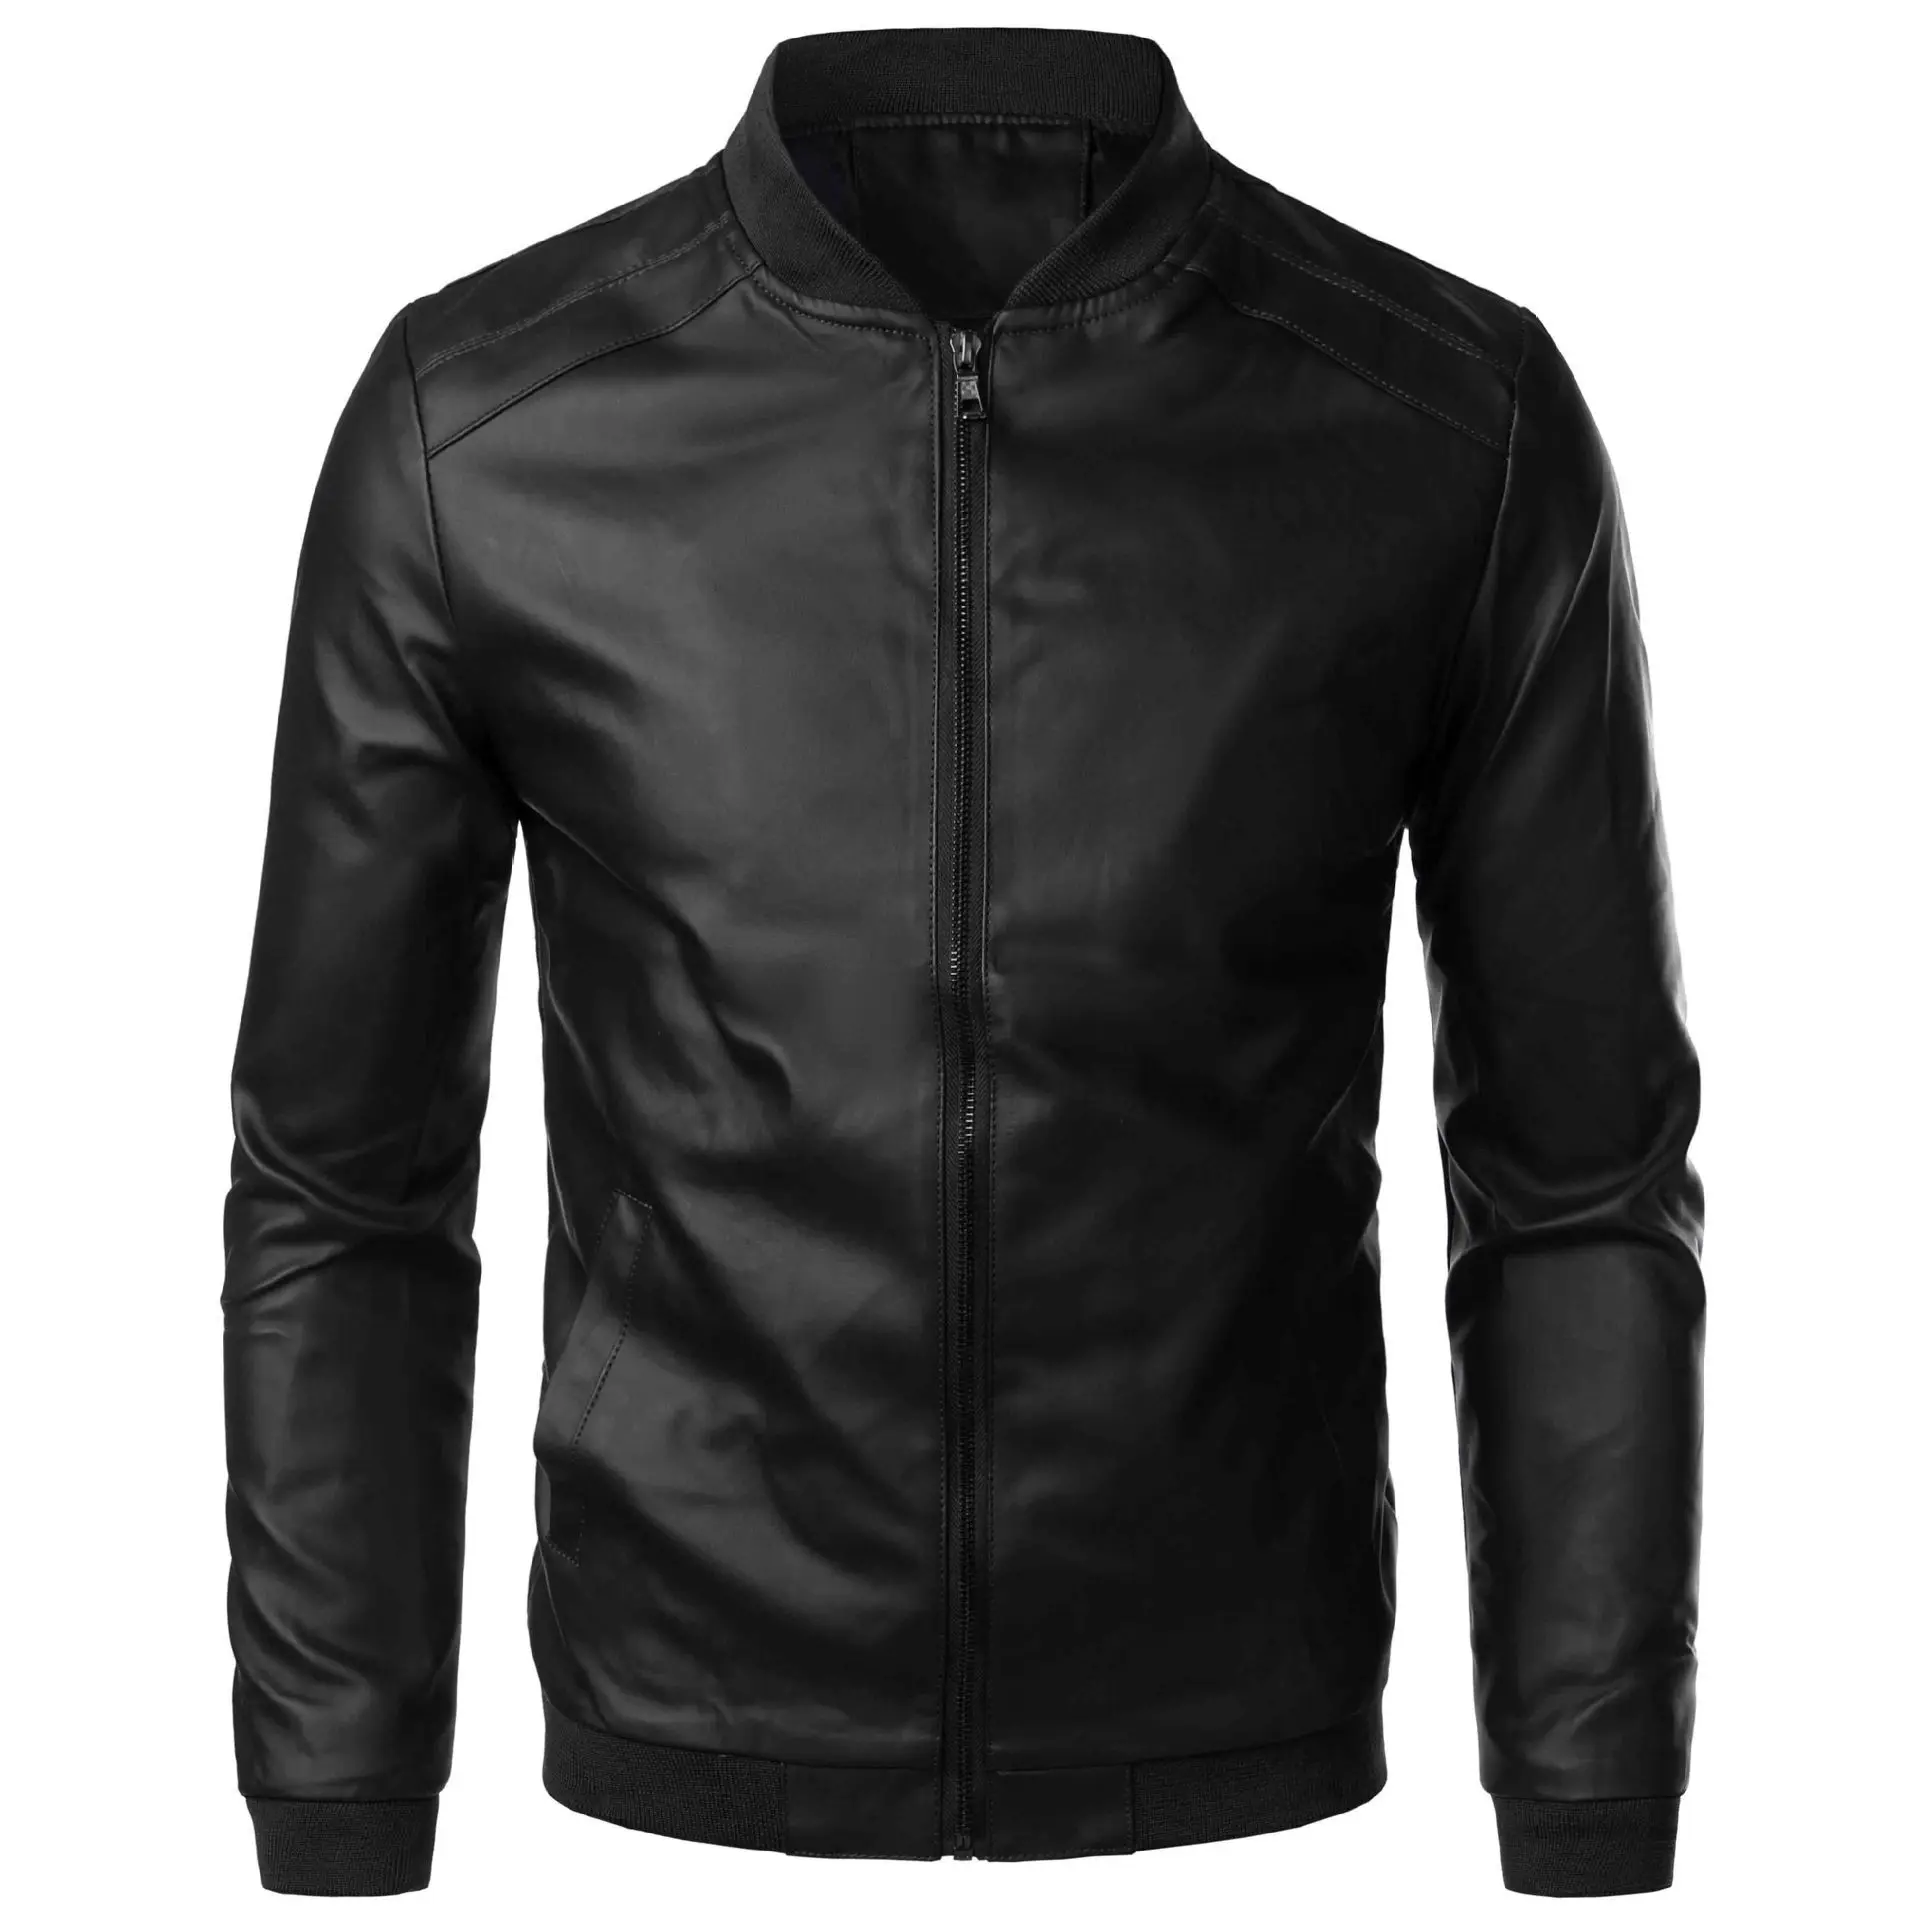 Men spring and autumn out wear PU leather jacket fashion motorcycle Korean slim-fit stand collar long sleeve zipper coat